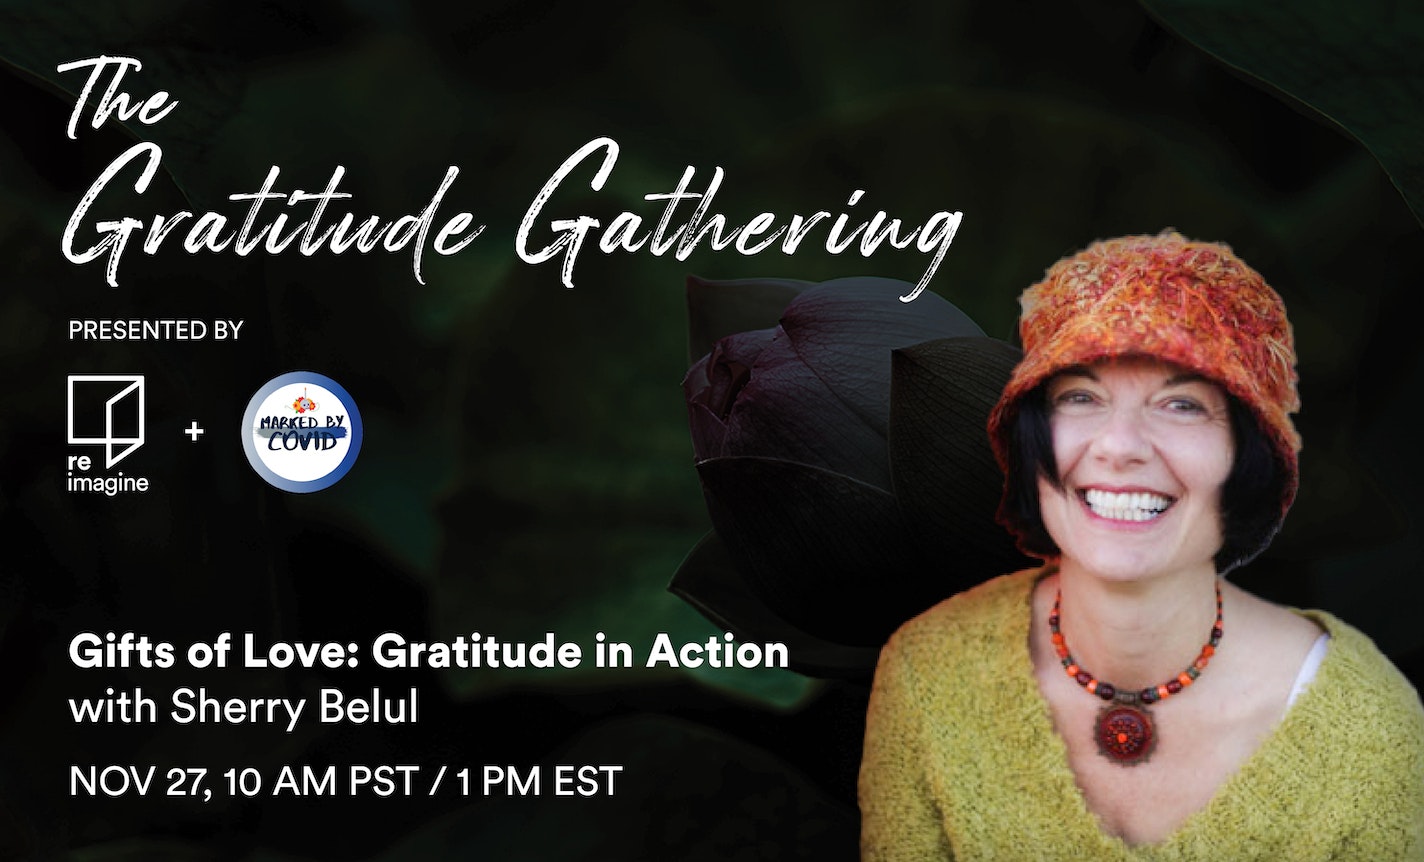 Gifts of Love: Gratitude in Action